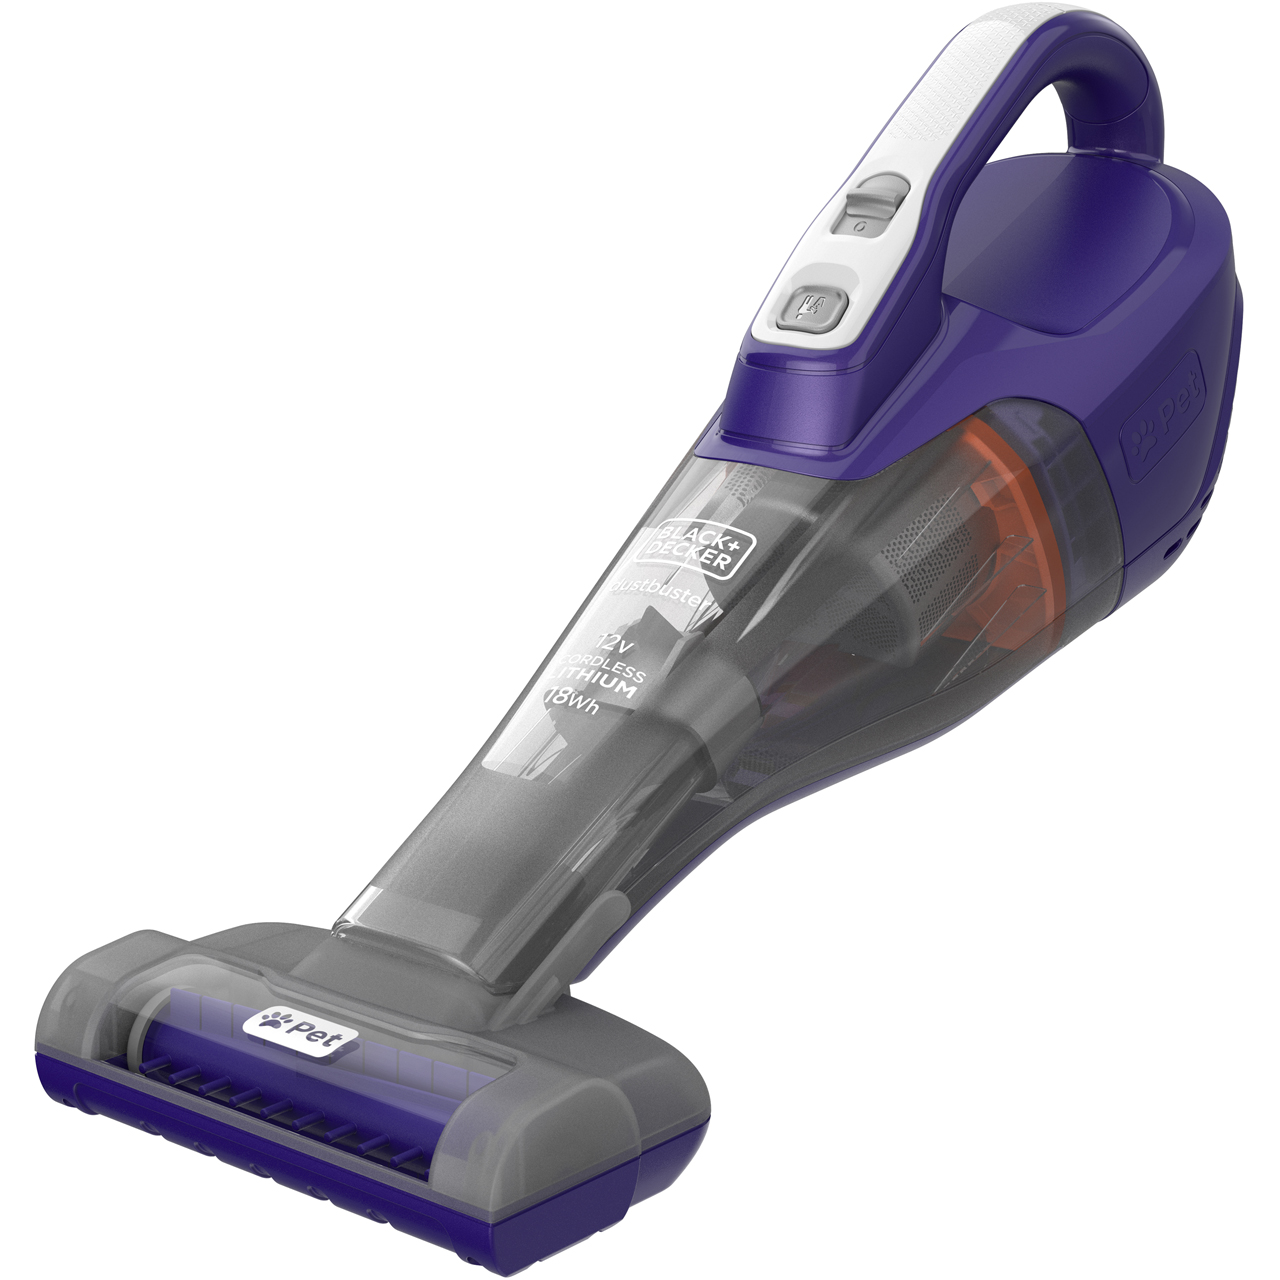 Black + Decker 12v Pet Dustbuster DVB315JP-GB Handheld Vacuum Cleaner with up to 9 Minutes Run Time Review